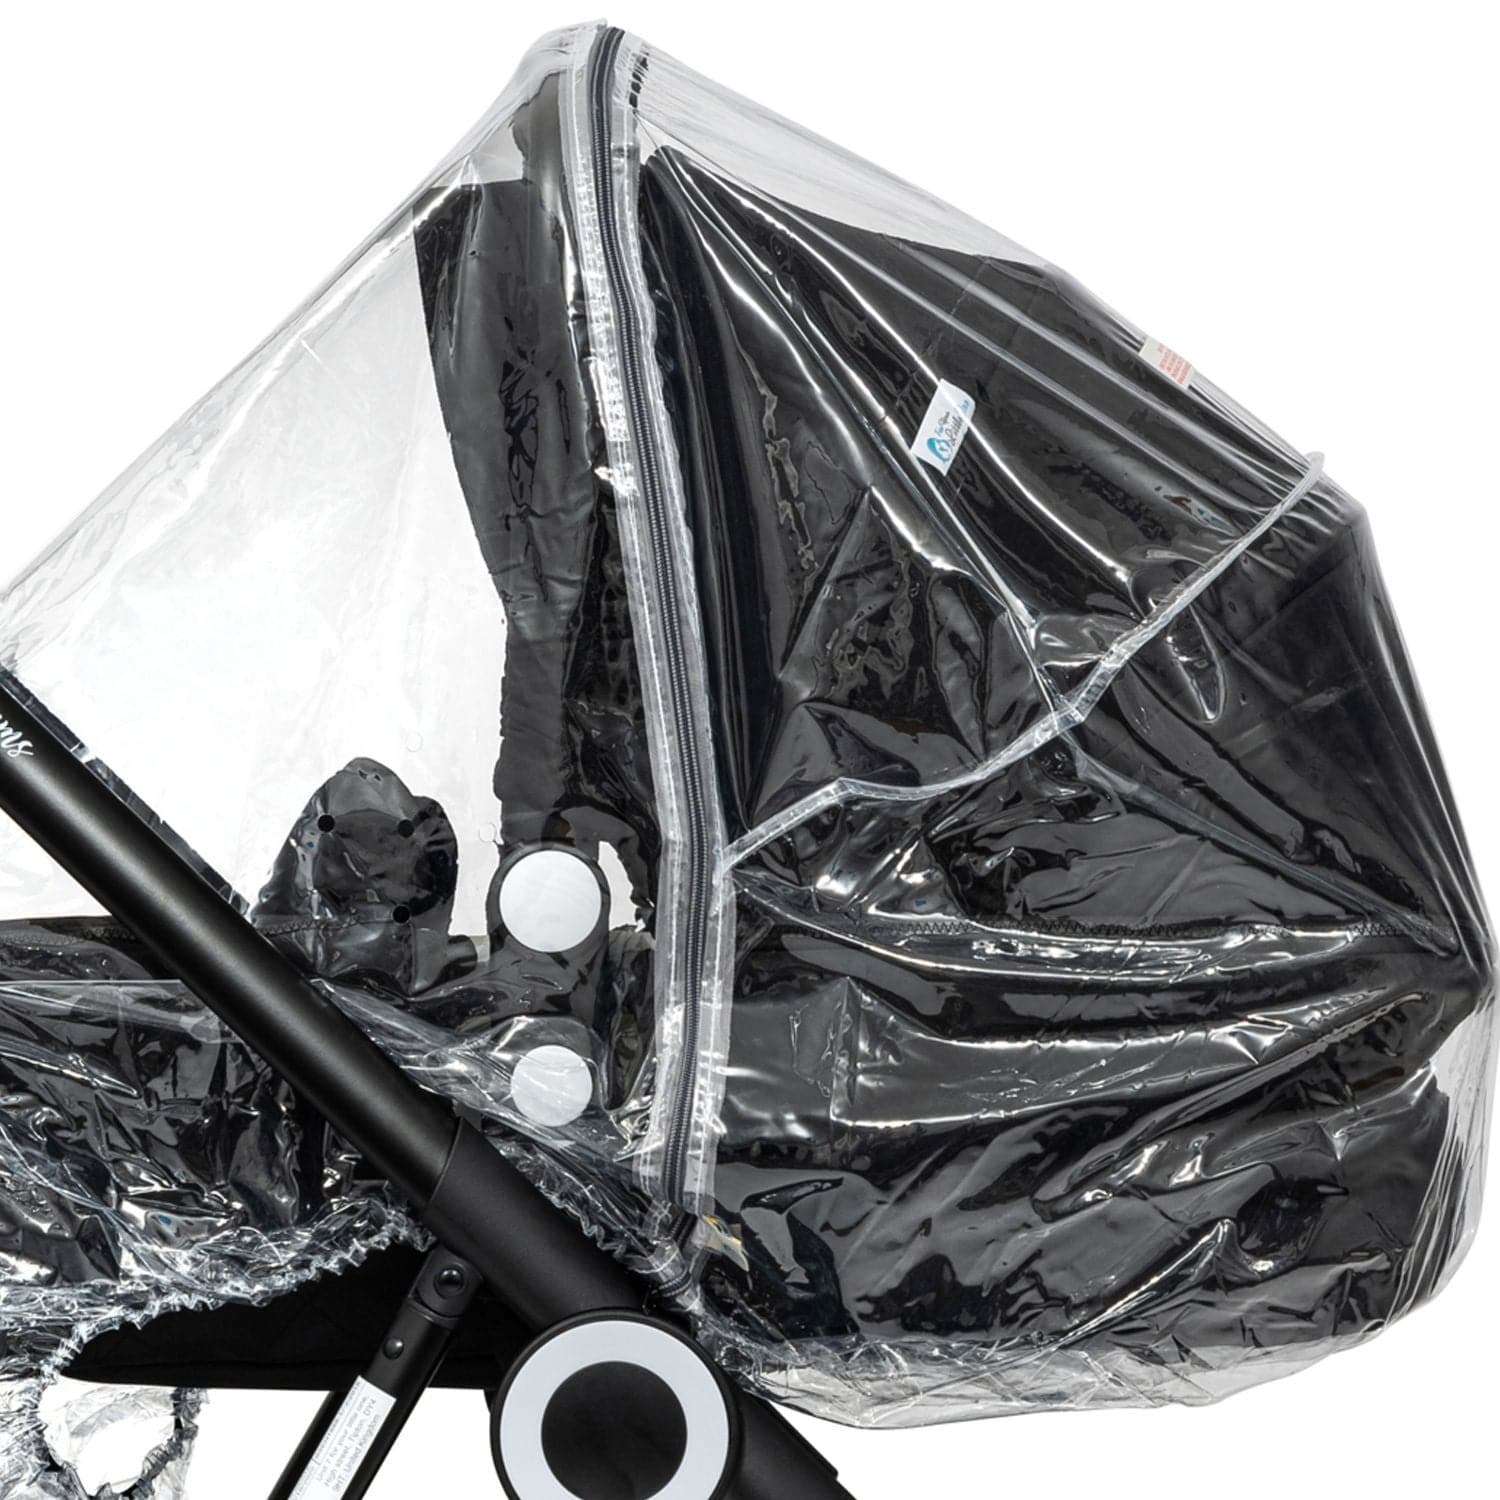 Carrycot Raincover Compatible With Esprit - Fits All Models - For Your Little One